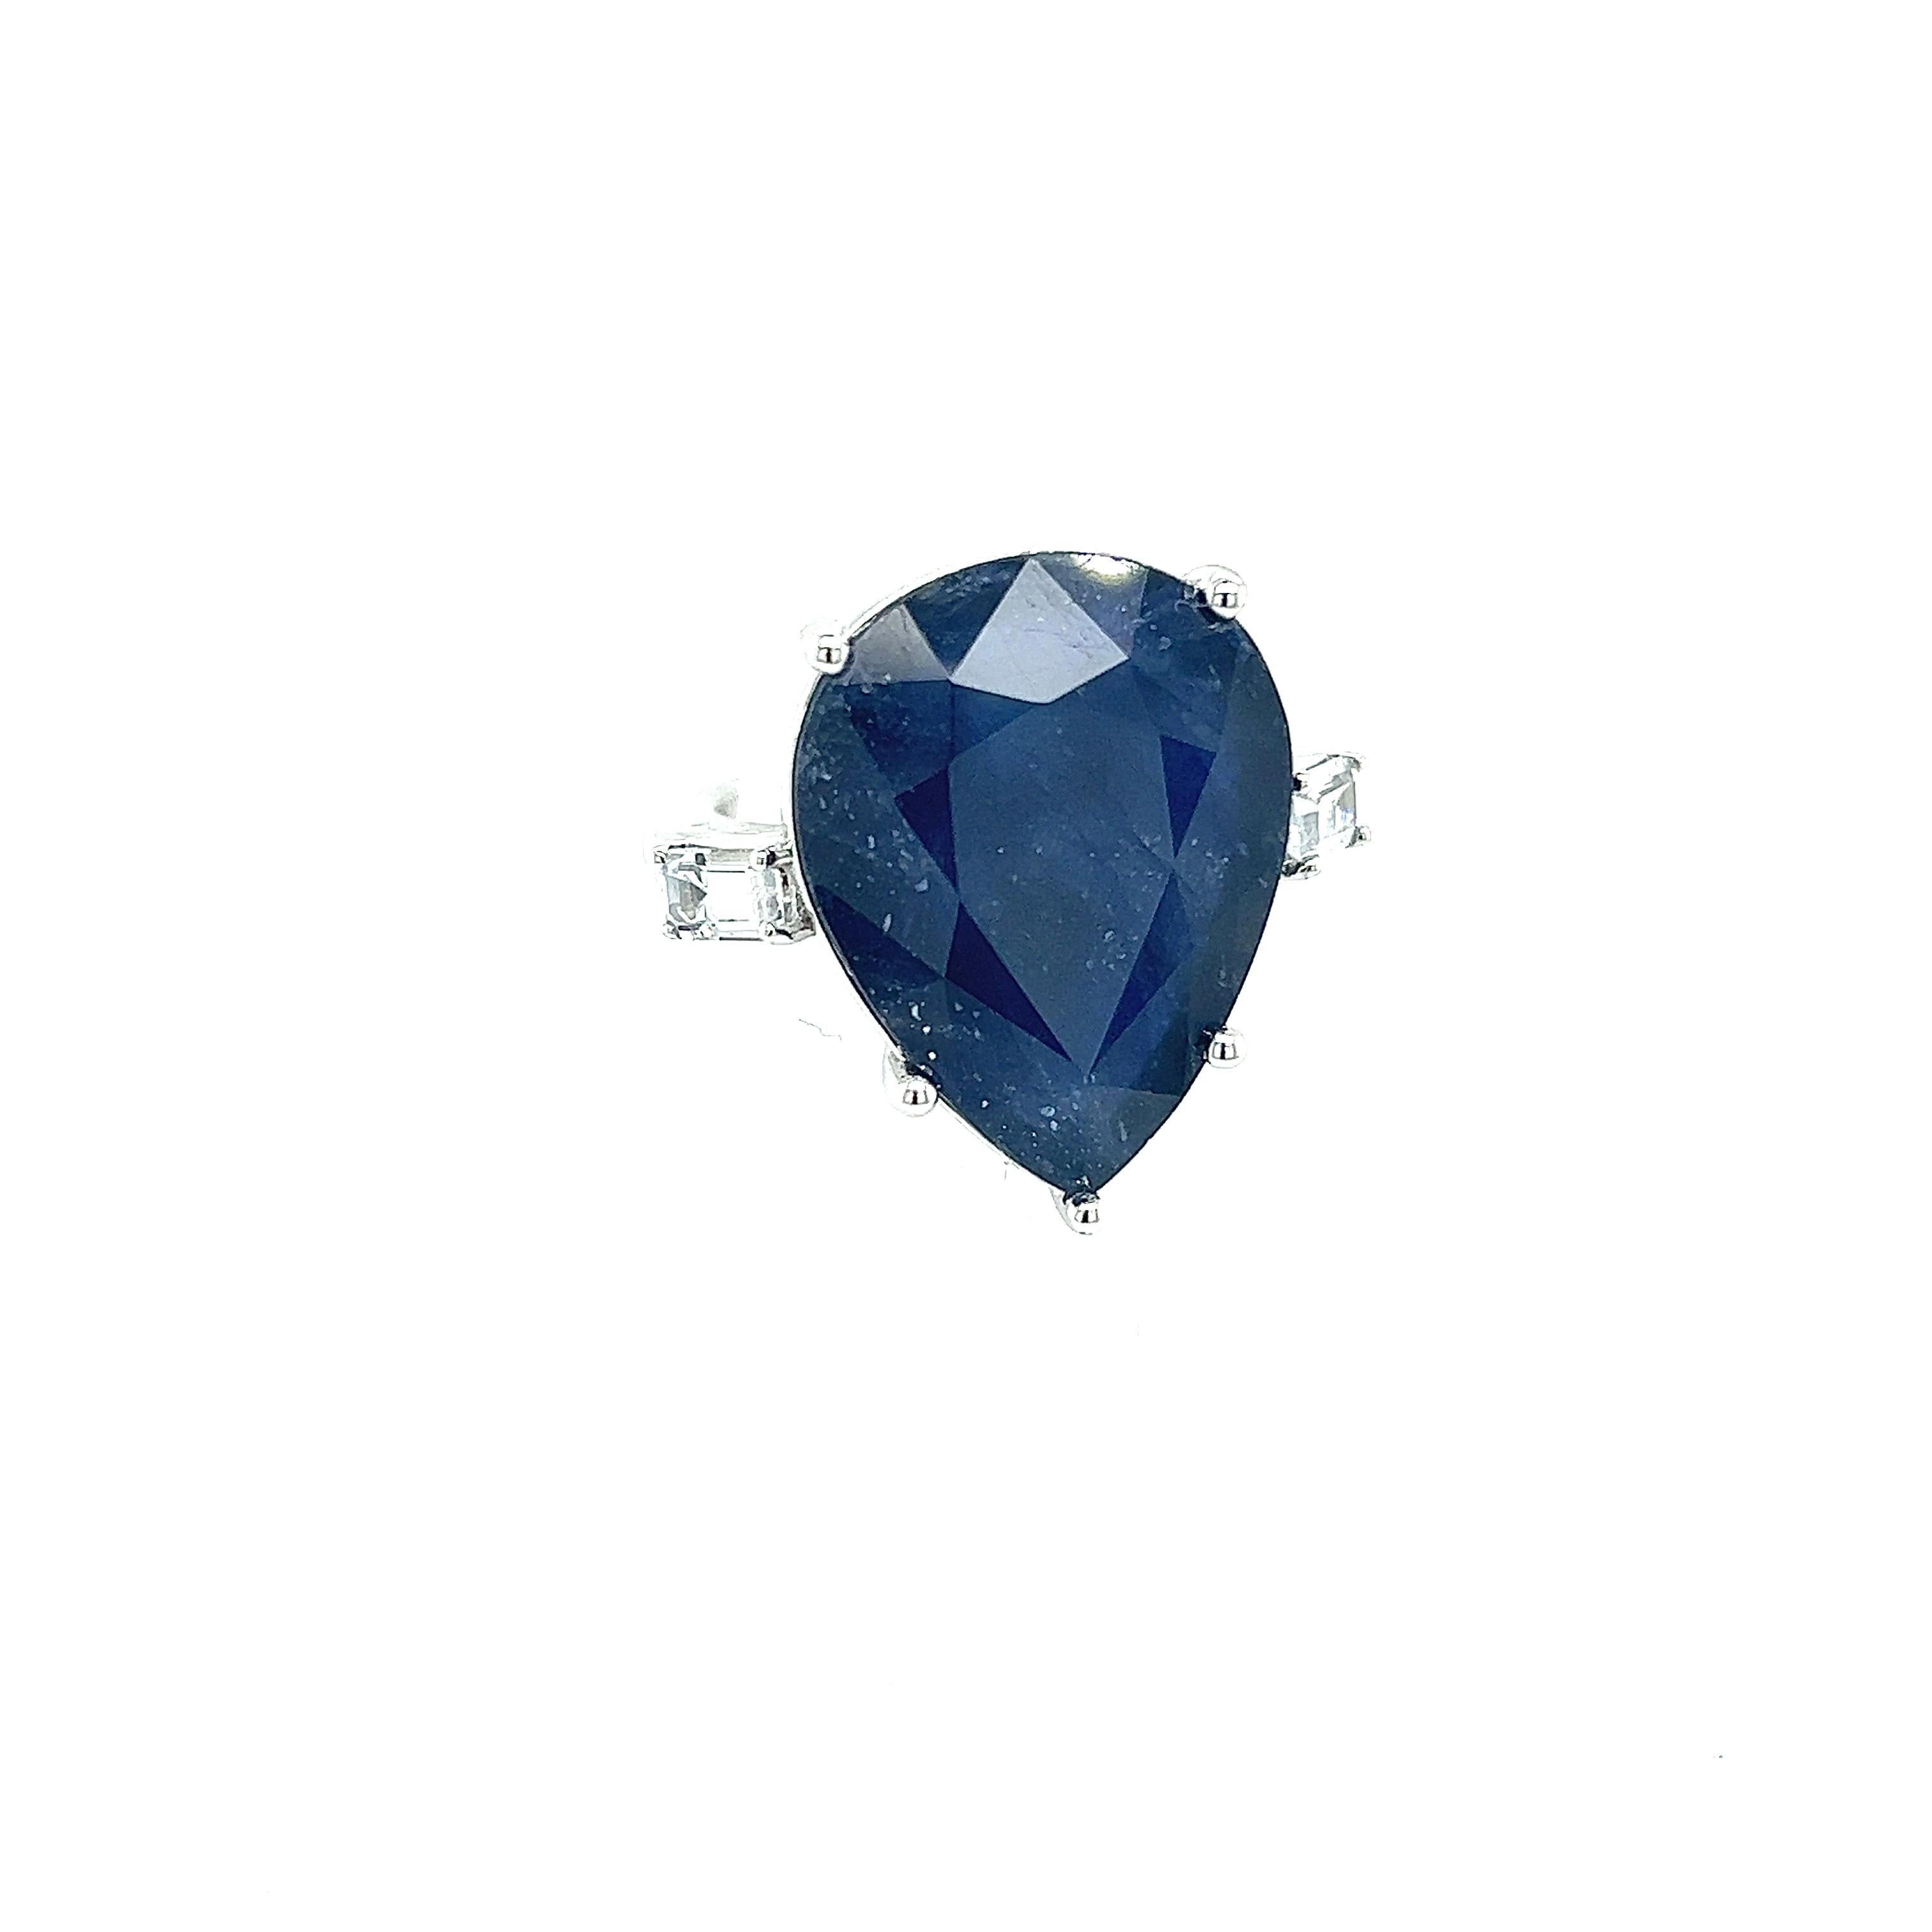 Natural Sapphire Diamond Ring Size 6.5 14k W Gold 17.73 TCW Certified For Sale 6